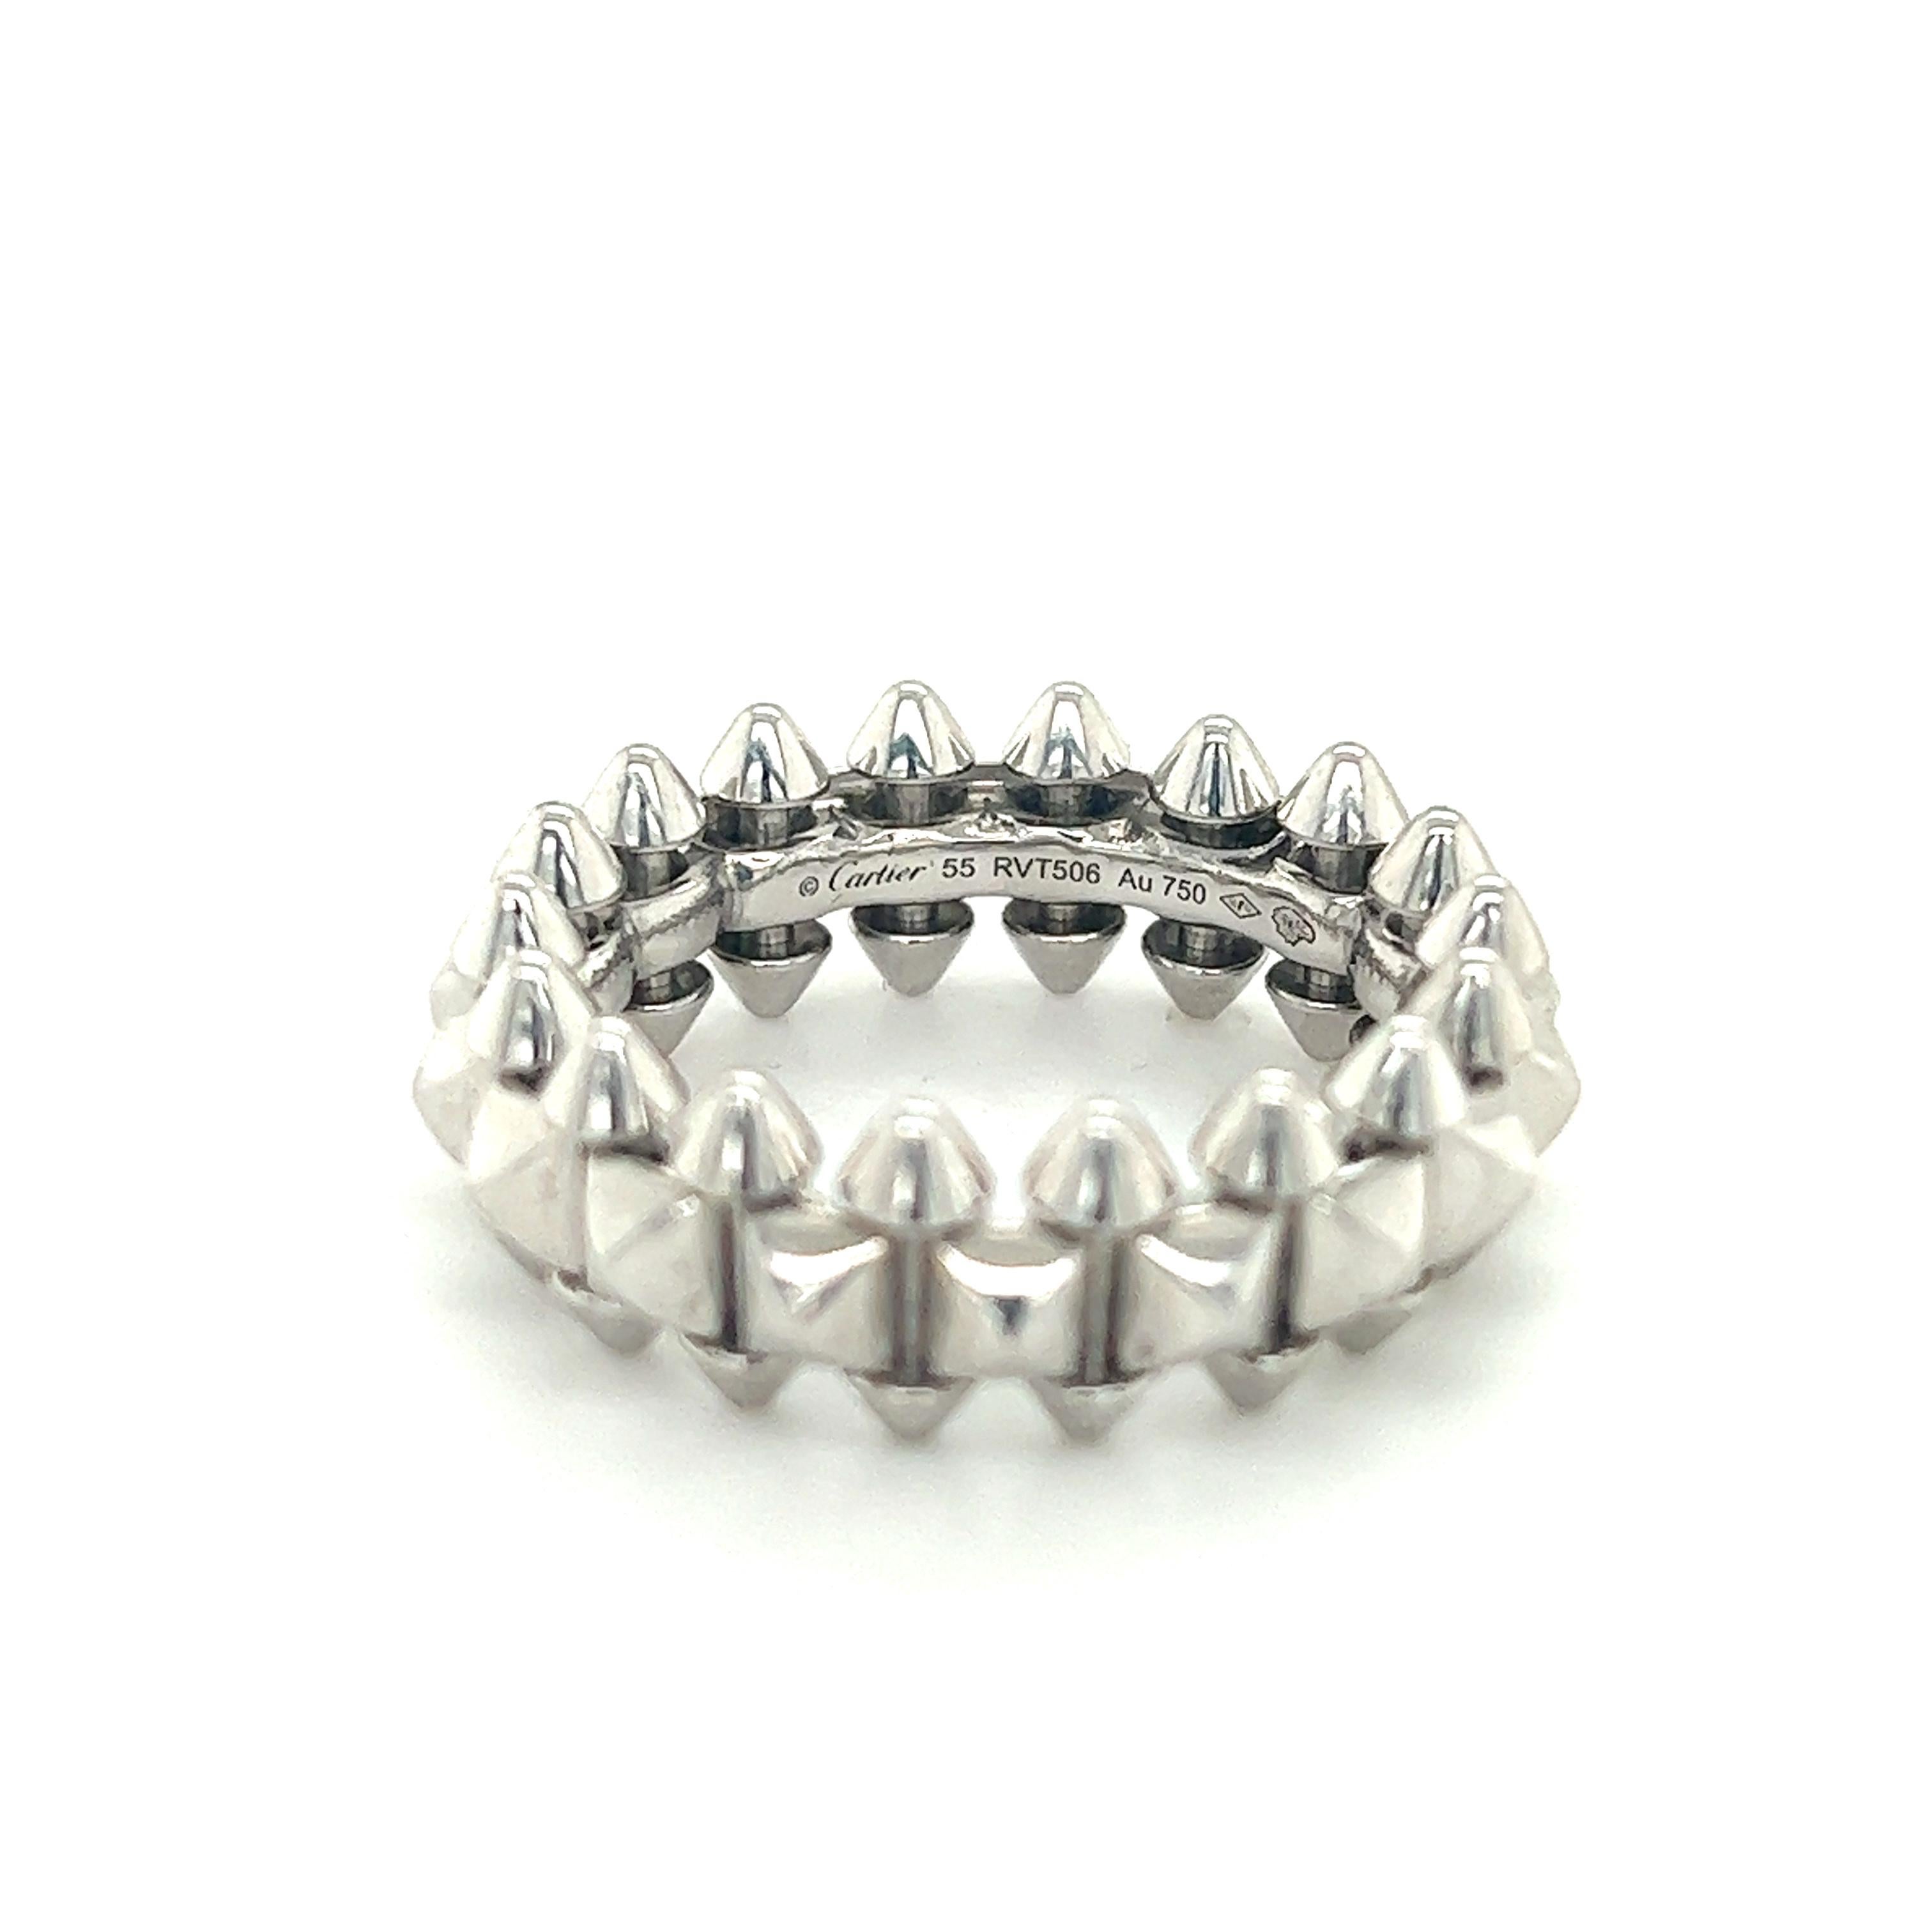 Beautiful ring from famed designer Cartier. The ring is from the Clash de Cartier collection. This model is crafted in 18k white gold with a rhodiumized finish, it is the medium model of the design showing a 8 mm width. 
The design shows spikes at